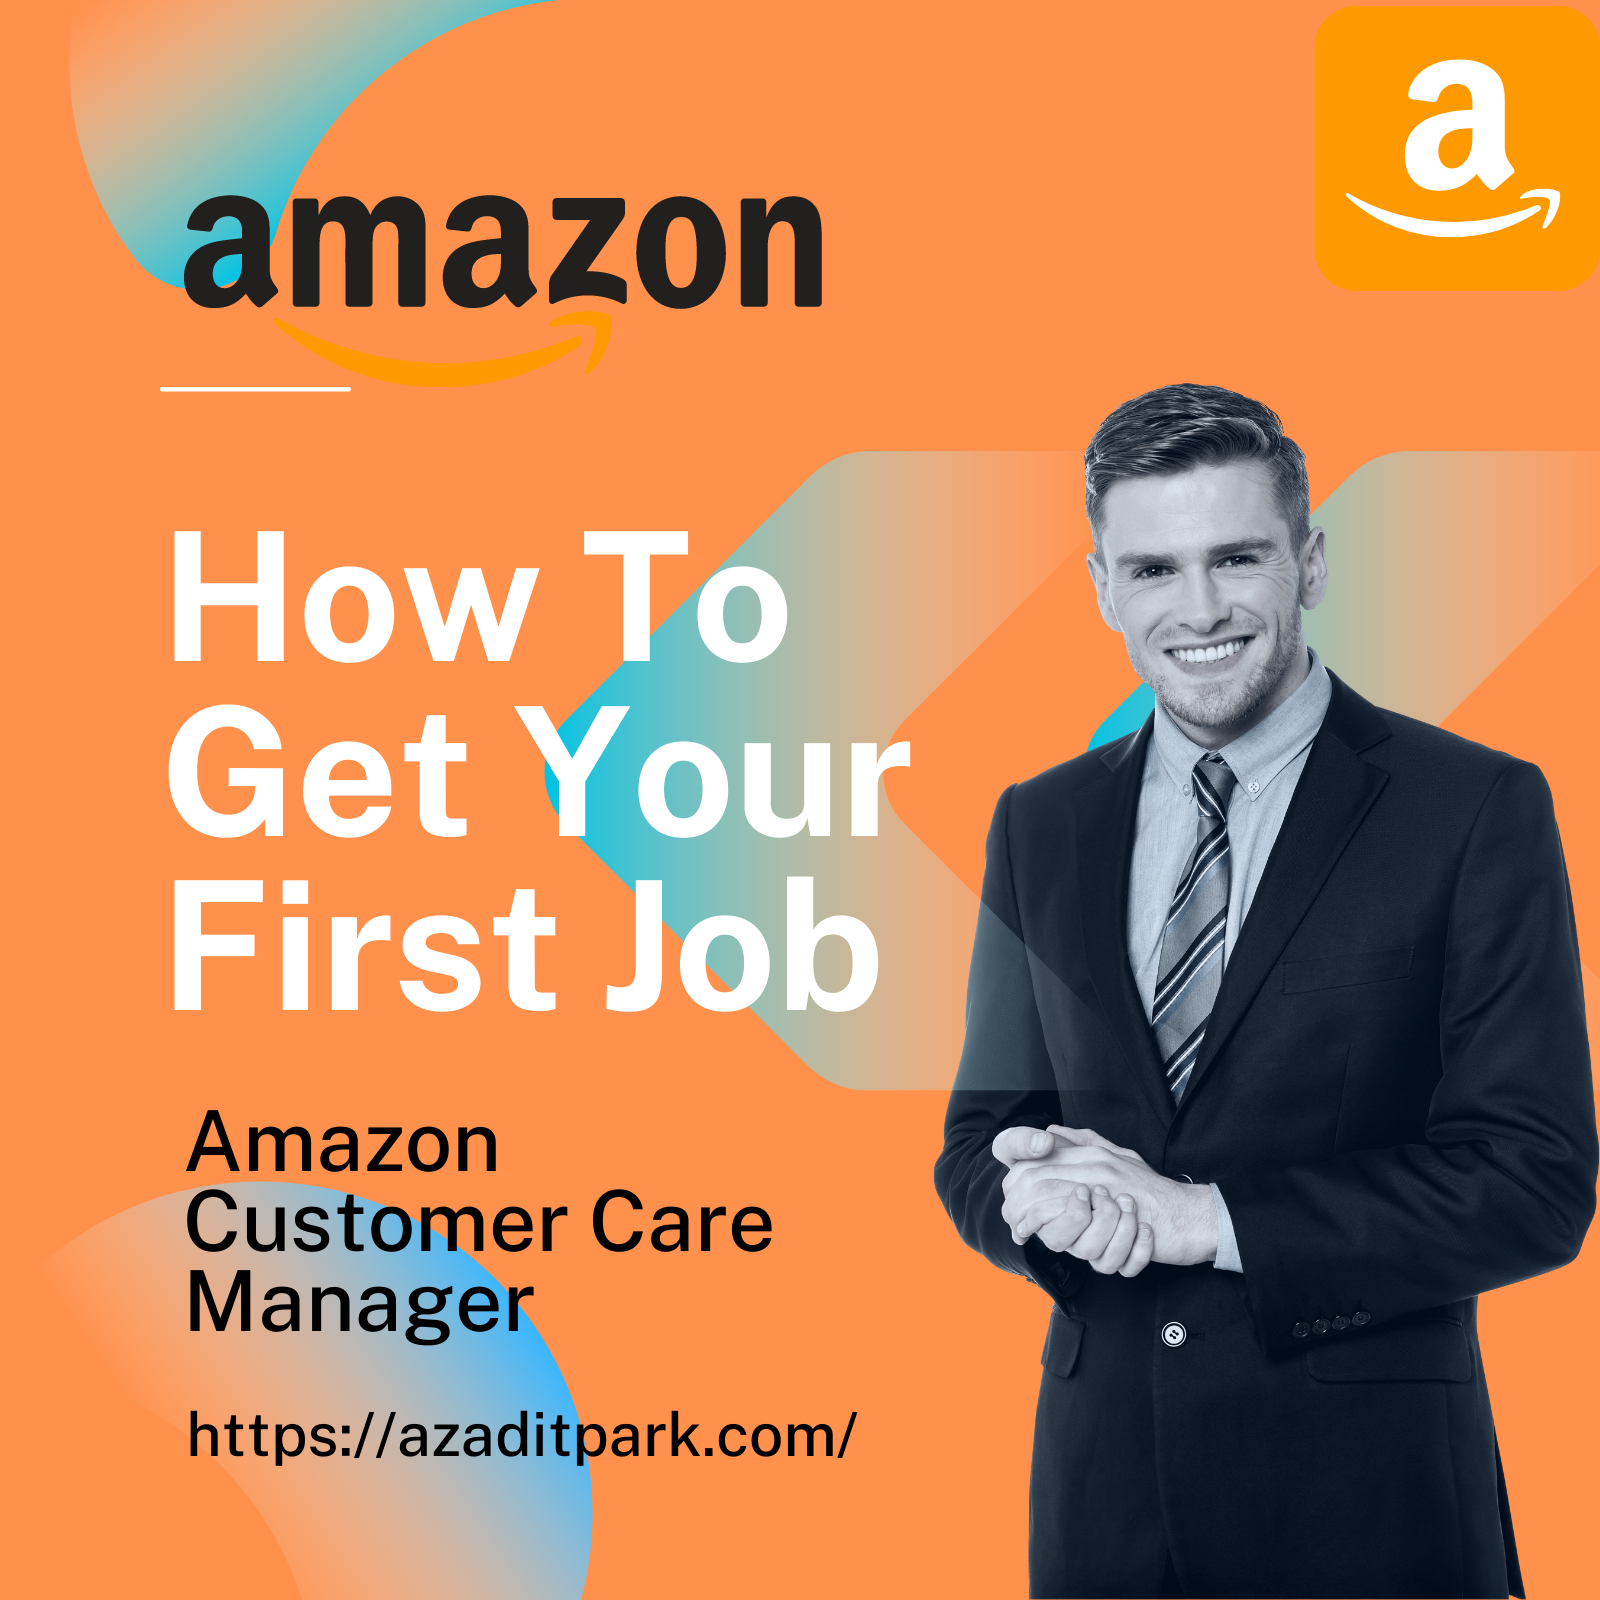 Read more about the article Amazon Customer Care Manager<span class="rmp-archive-results-widget "><i class=" rmp-icon rmp-icon--ratings rmp-icon--star rmp-icon--full-highlight"></i><i class=" rmp-icon rmp-icon--ratings rmp-icon--star rmp-icon--full-highlight"></i><i class=" rmp-icon rmp-icon--ratings rmp-icon--star rmp-icon--full-highlight"></i><i class=" rmp-icon rmp-icon--ratings rmp-icon--star rmp-icon--full-highlight"></i><i class=" rmp-icon rmp-icon--ratings rmp-icon--star rmp-icon--full-highlight"></i> <span>4.9 (42)</span></span>